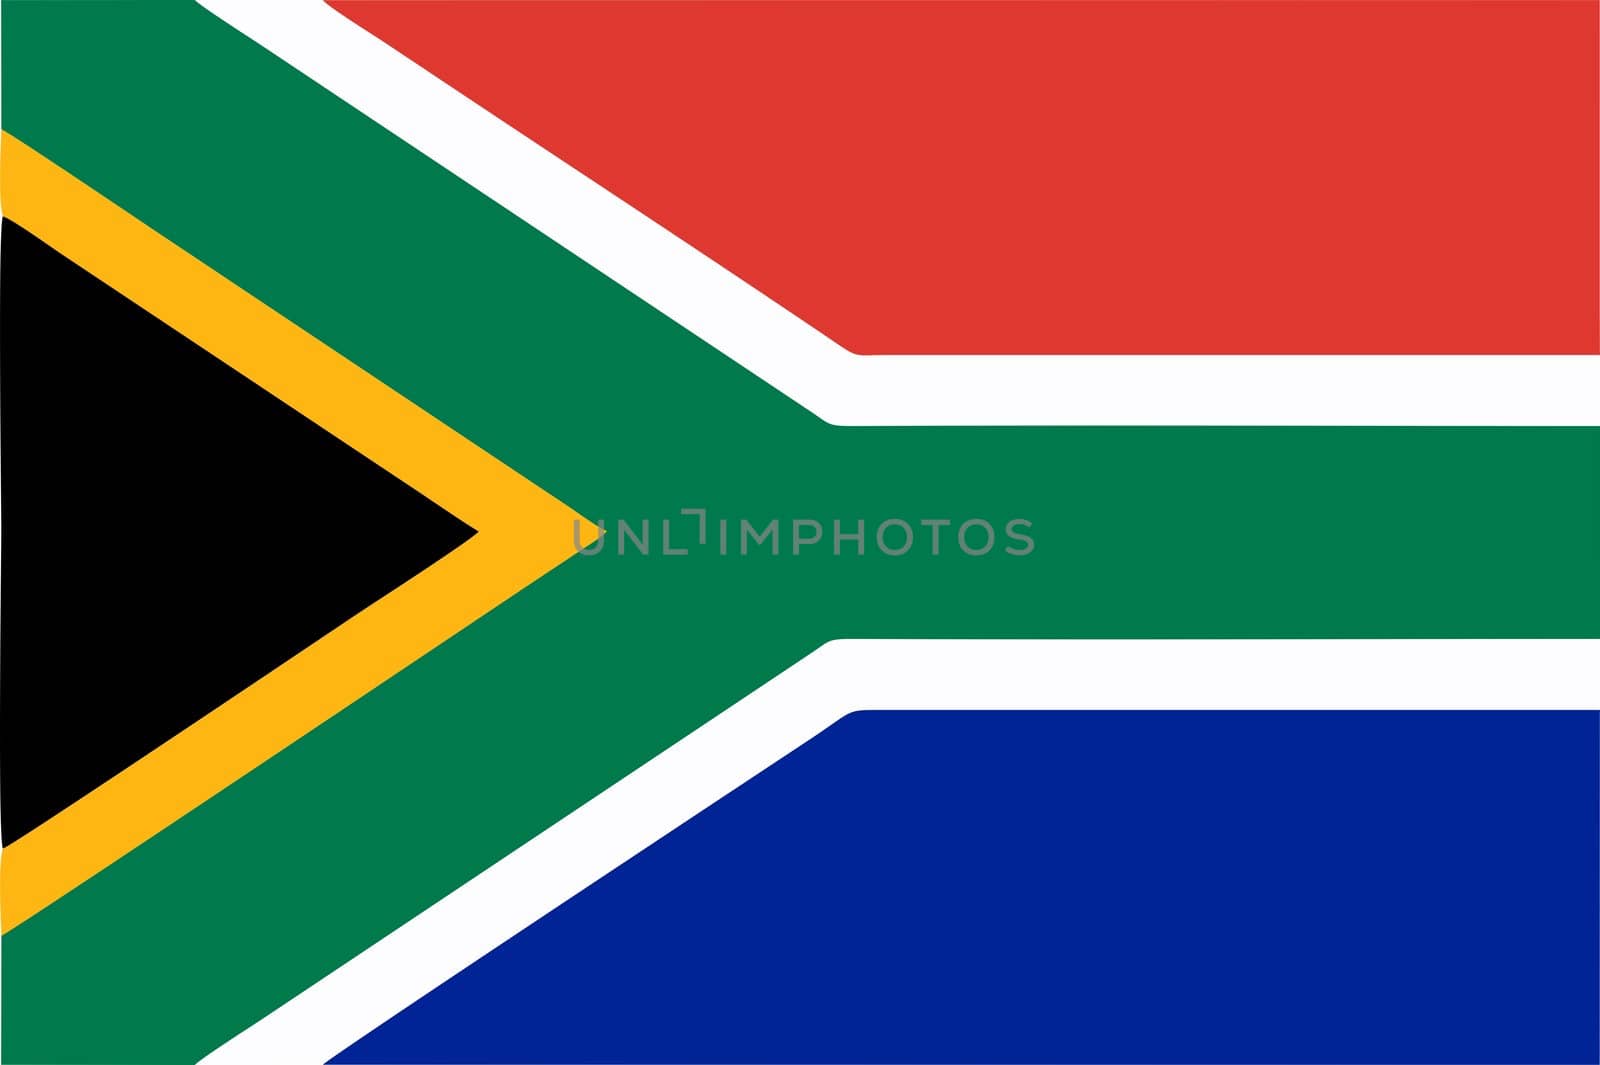 South Africa flag icon - isolated vector illustration